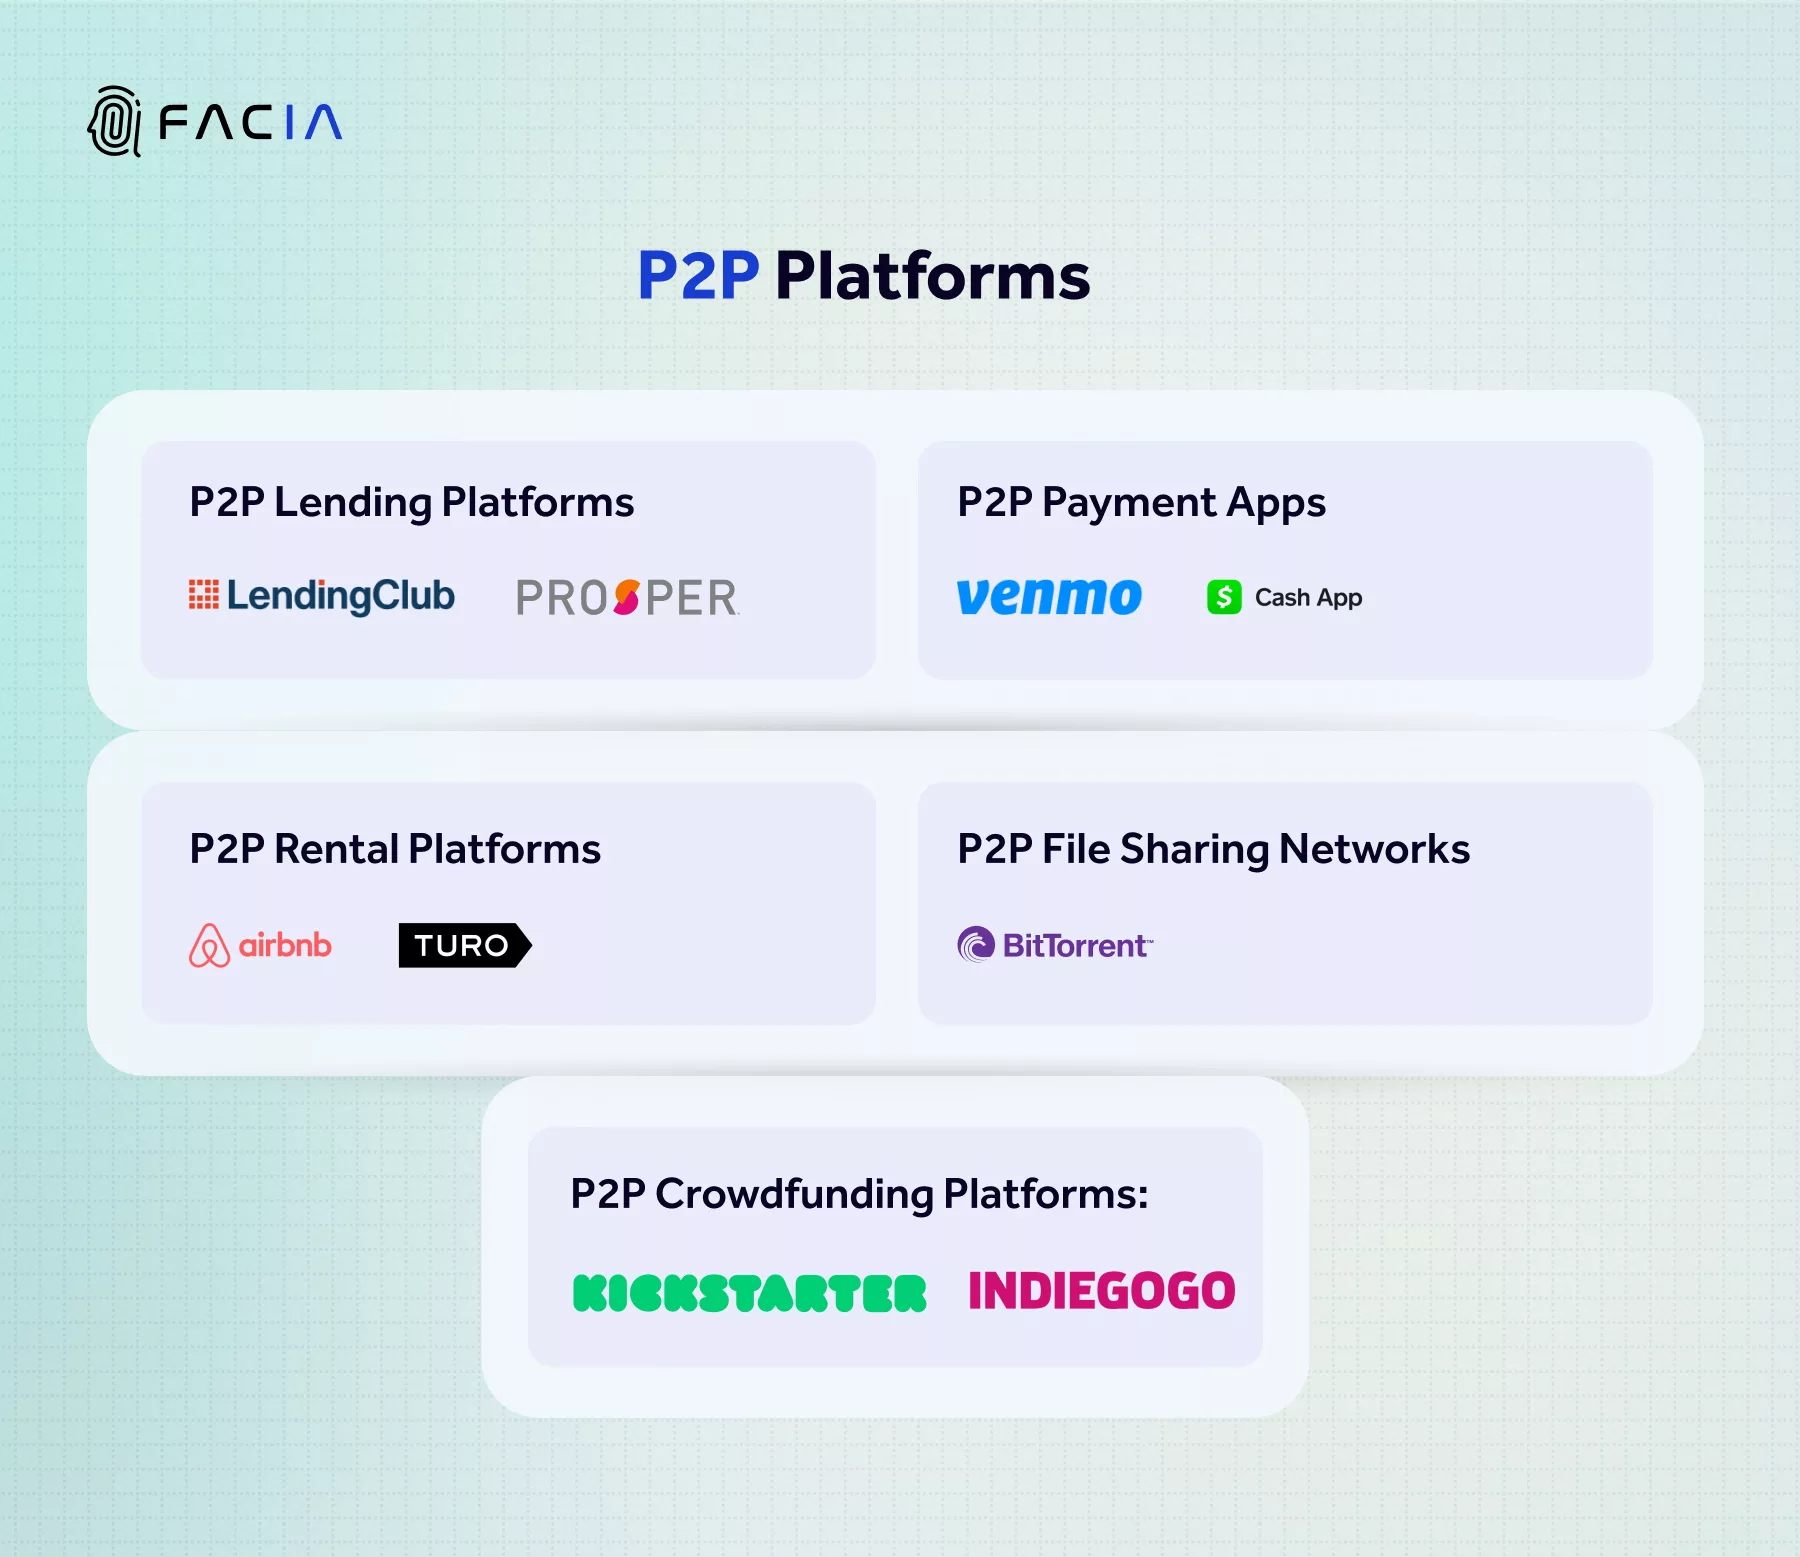 P2P businesses under different Platforms are operating successfully.